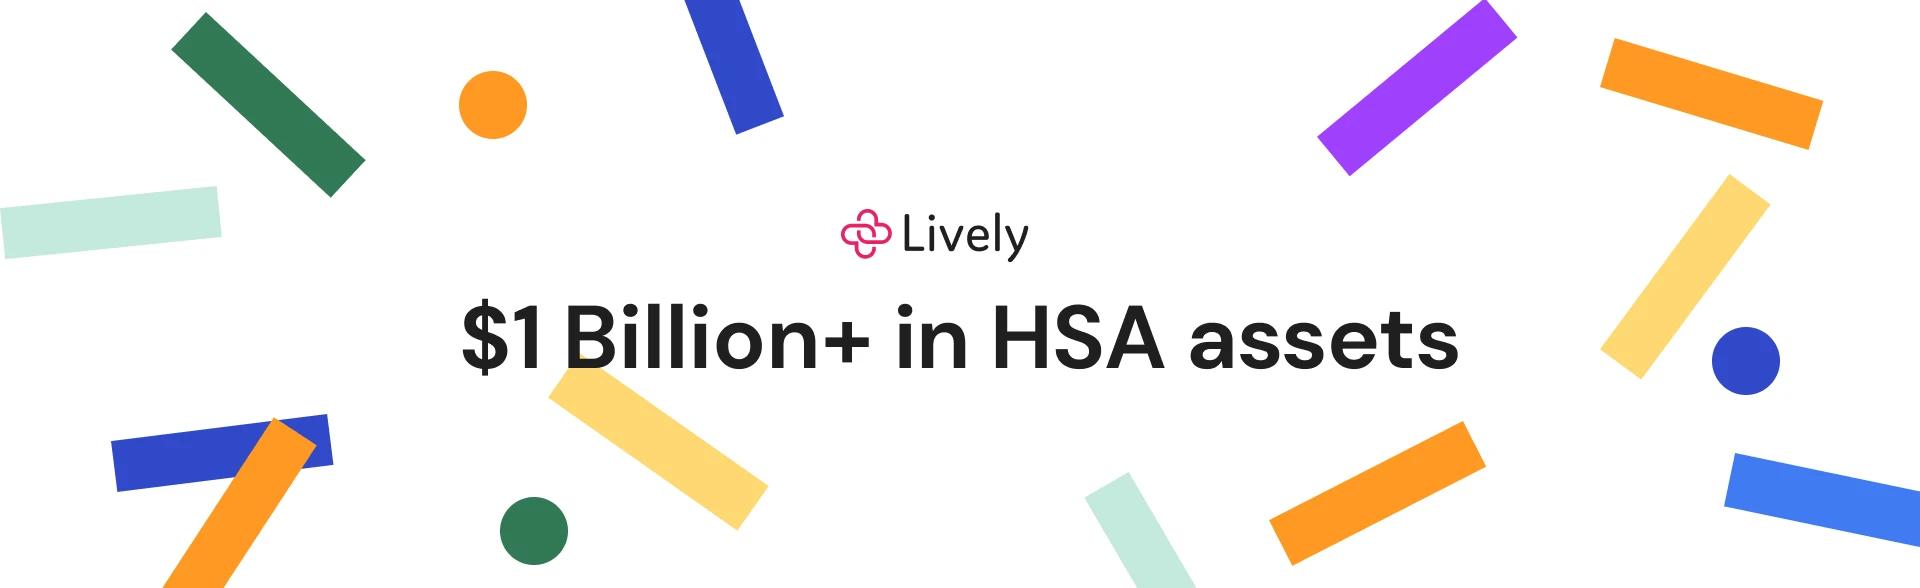 Lively now has $1 billion in HSA assets 